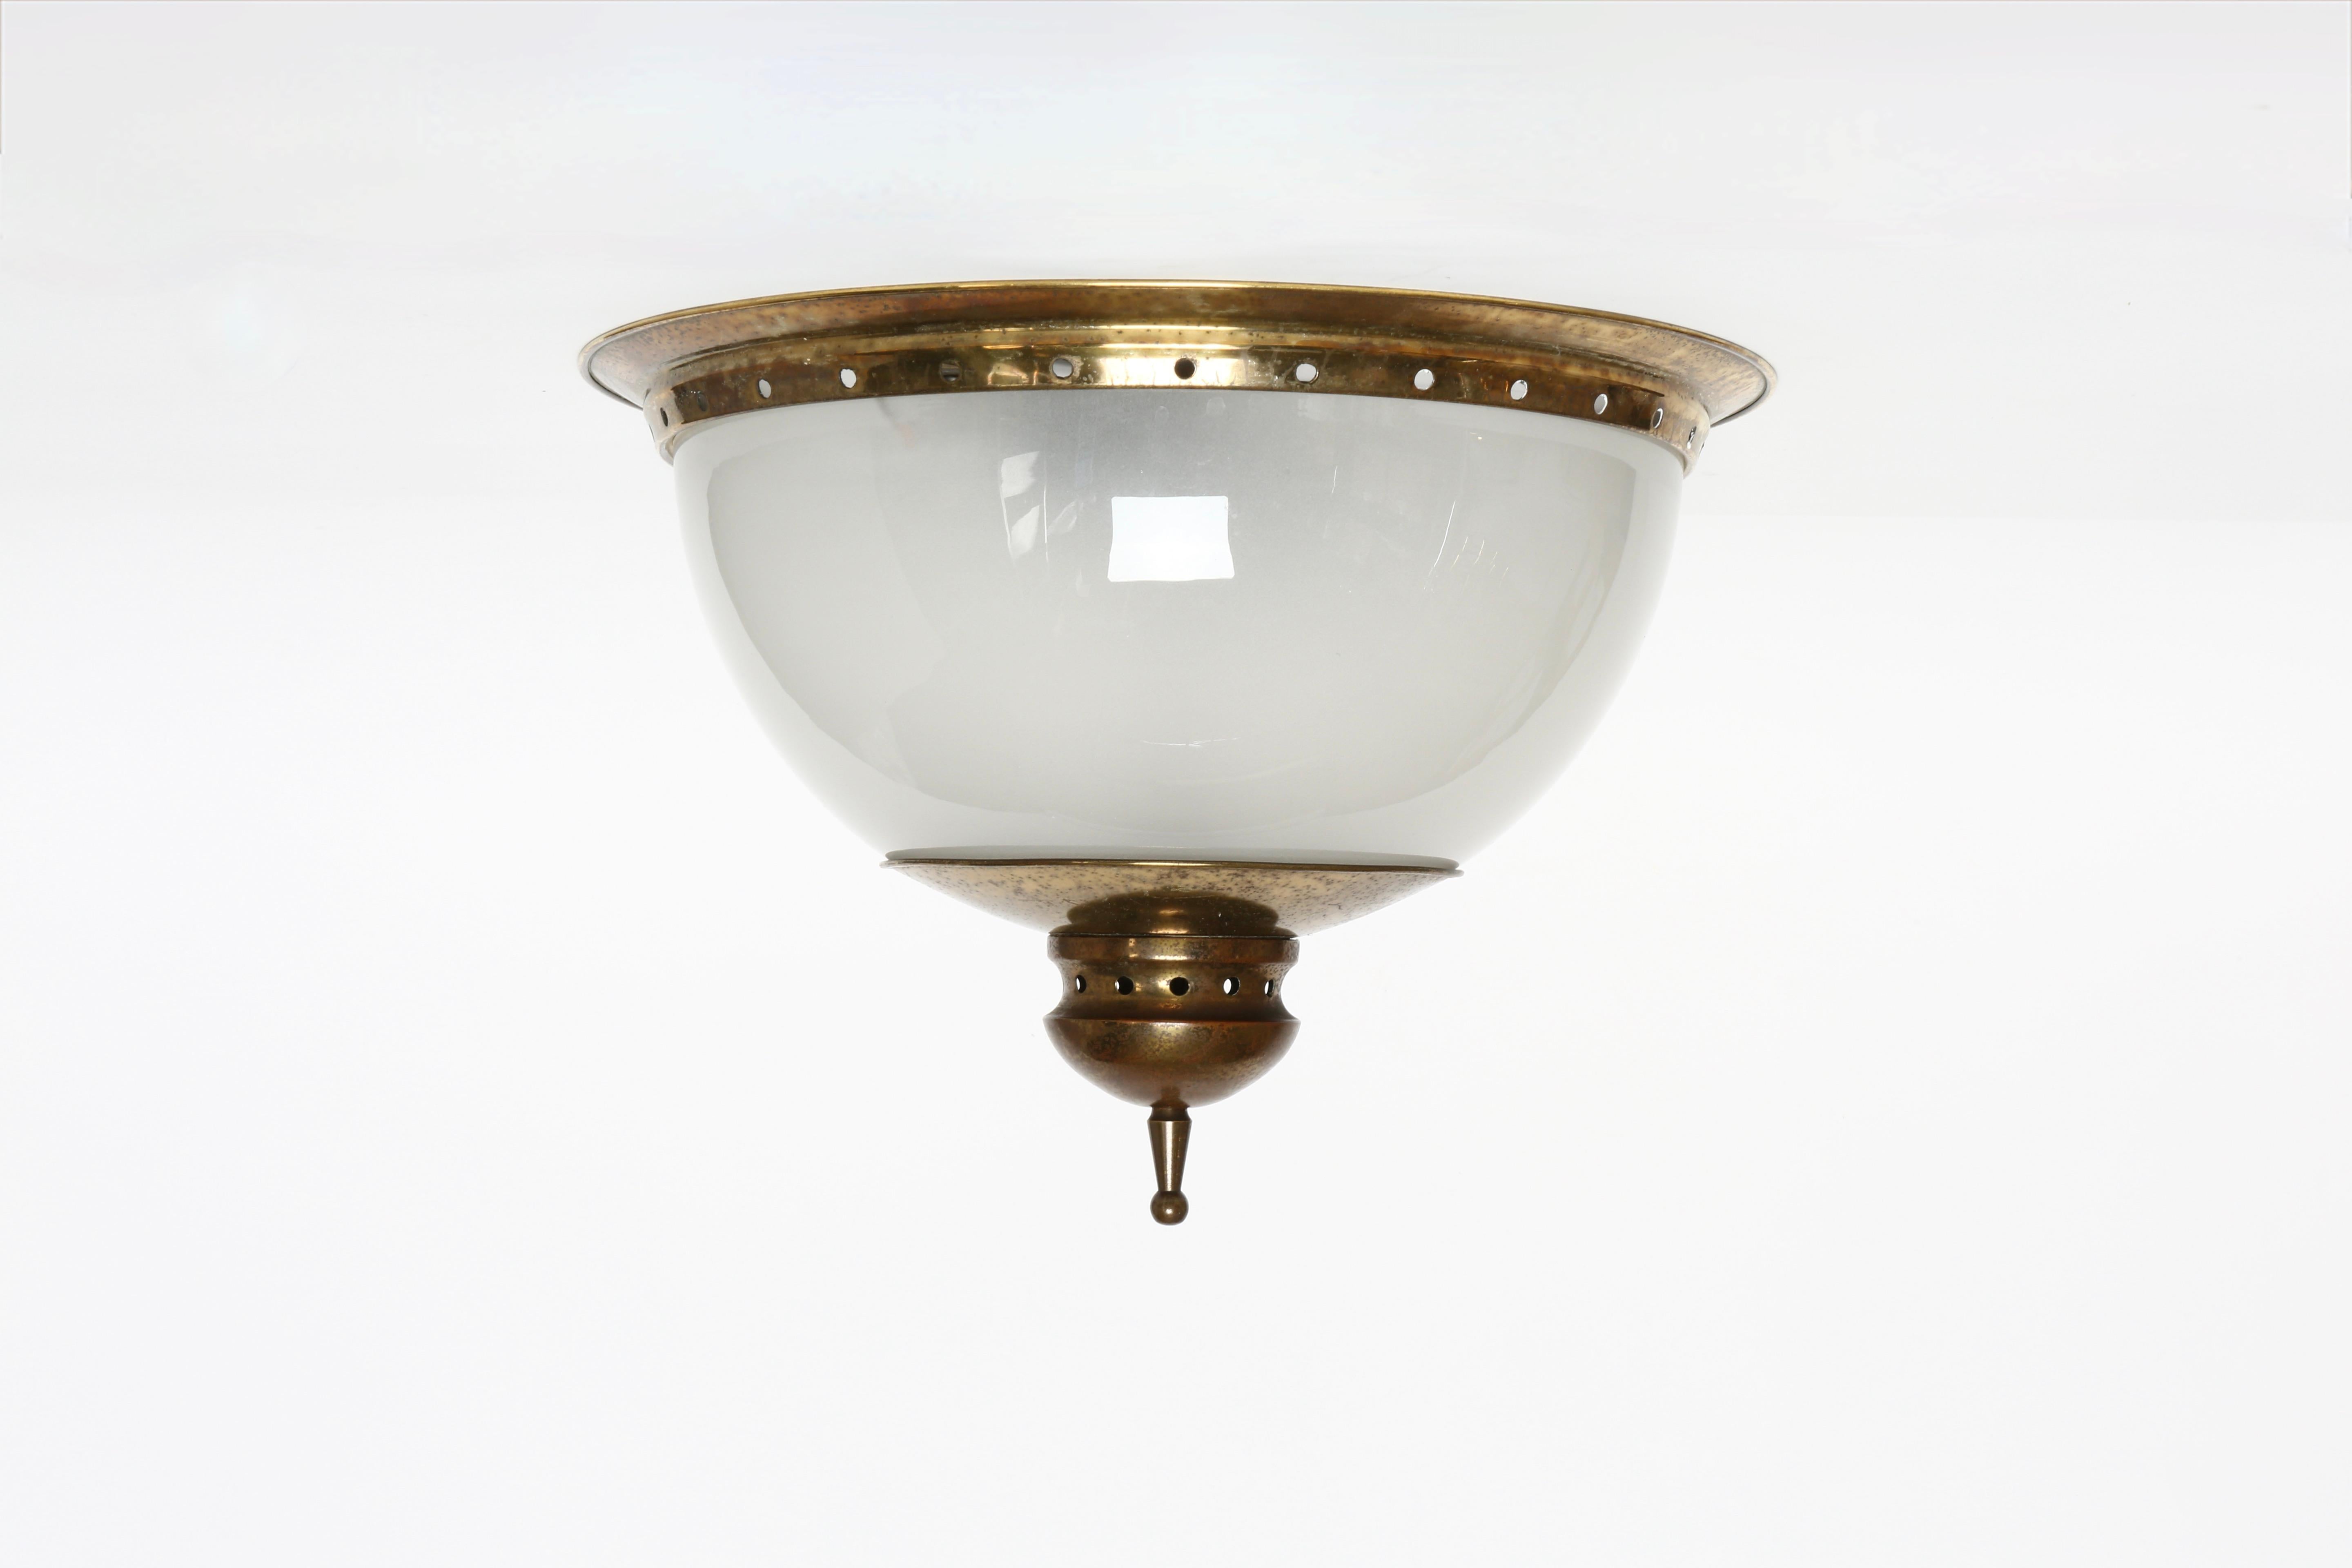 Luigi Caccia Dominioni for Azucena wall or ceiling light
Made in Italy, 1960s
Opalescent glass, brass
Takes 2 medium base bulbs
Complimentary US rewiring upon request
Price is for 1 light
3 lights are available.

At Illustris Lighting our main focus